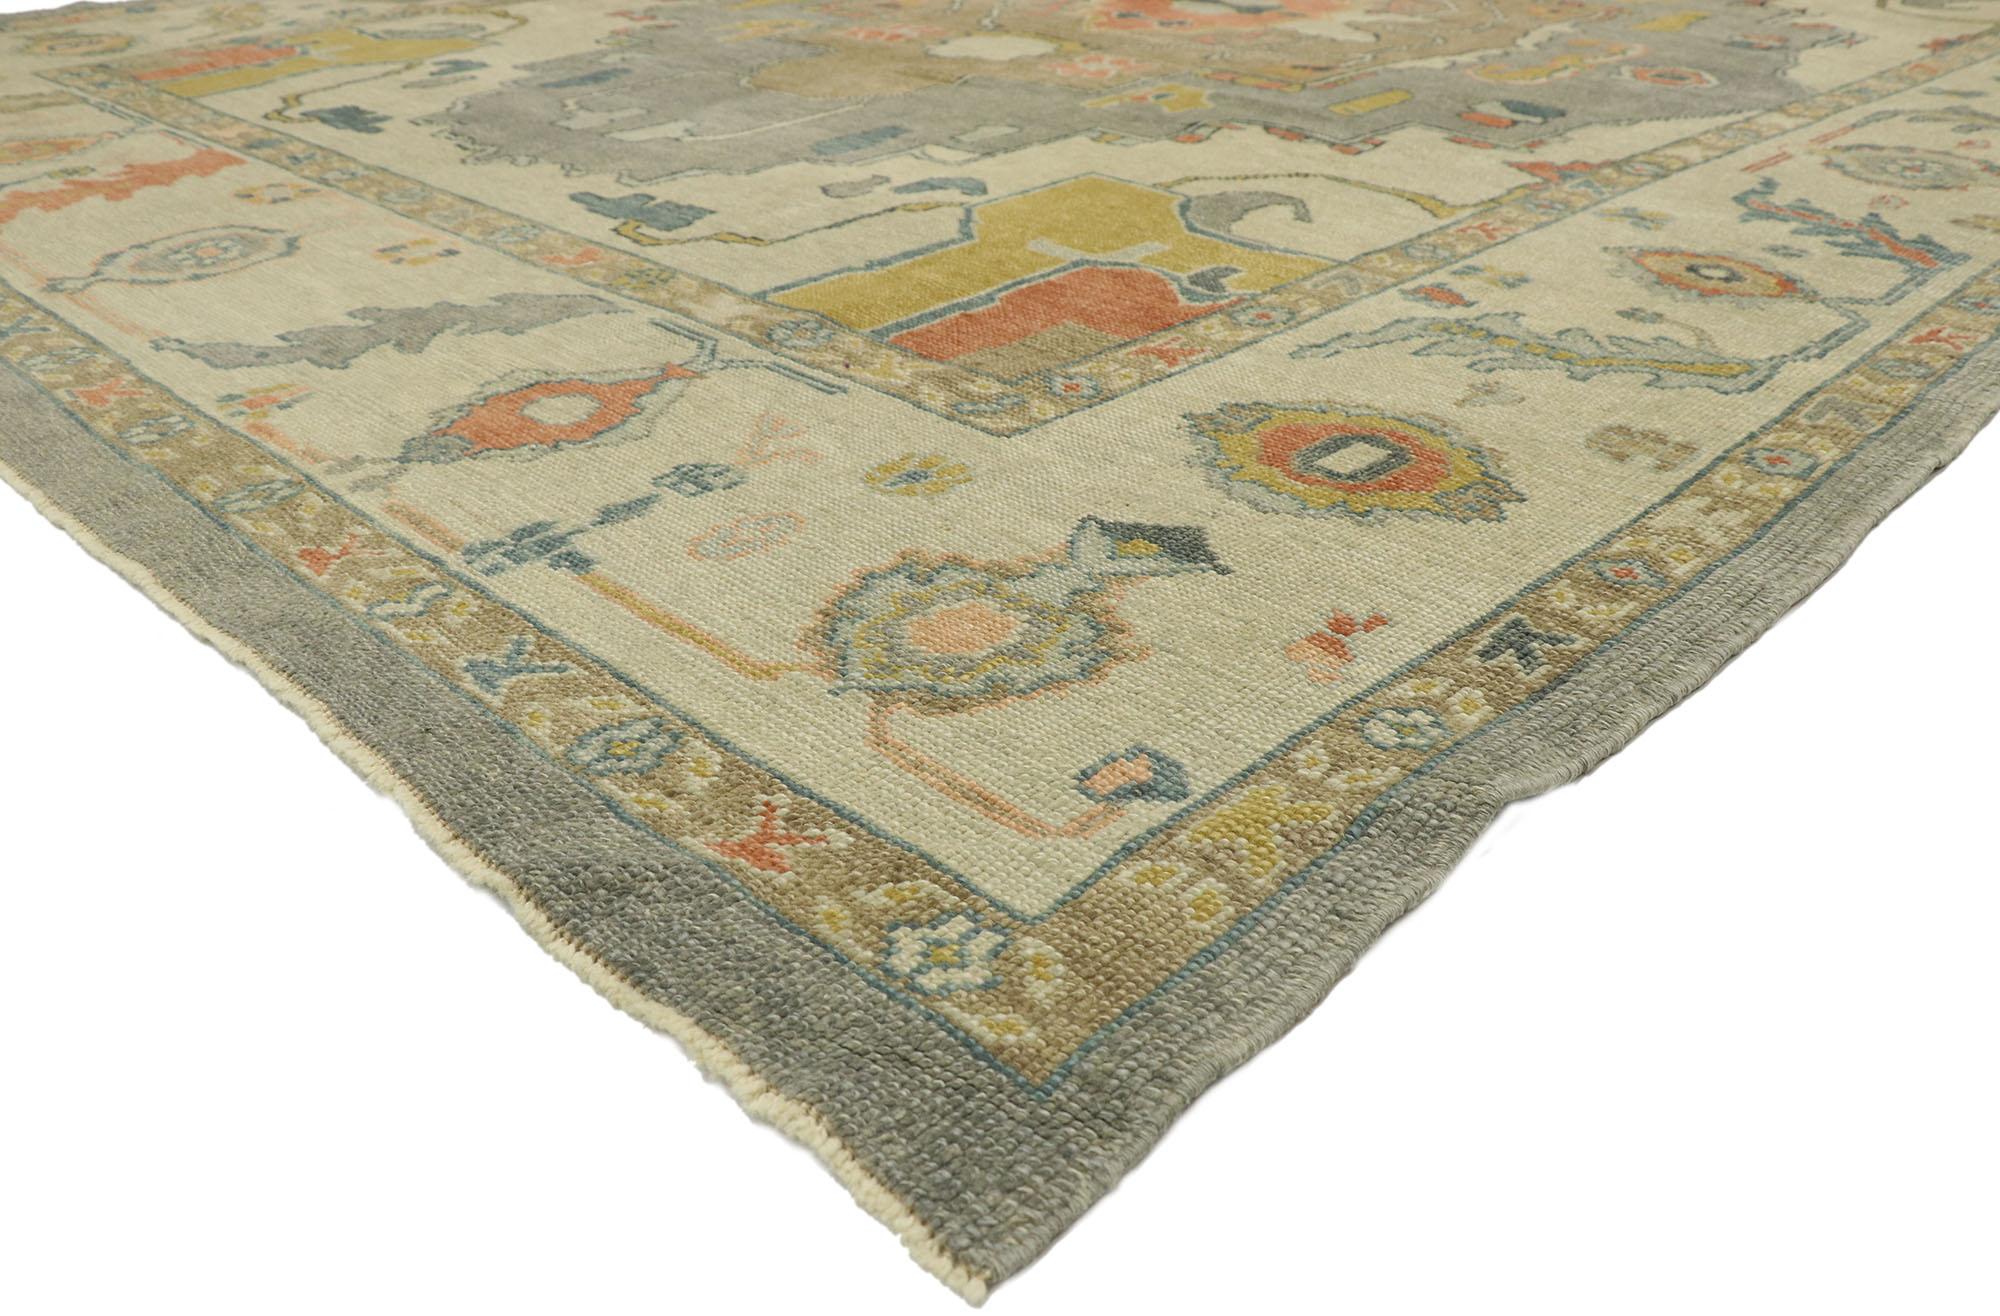 52800, new contemporary Turkish Oushak rug with Modern style 10'03 x 13'04. This hand-knotted wool new contemporary Turkish Oushak rug features a concentric center medallion patterned with and surrounded by amorphous shapes. It is enclosed with a